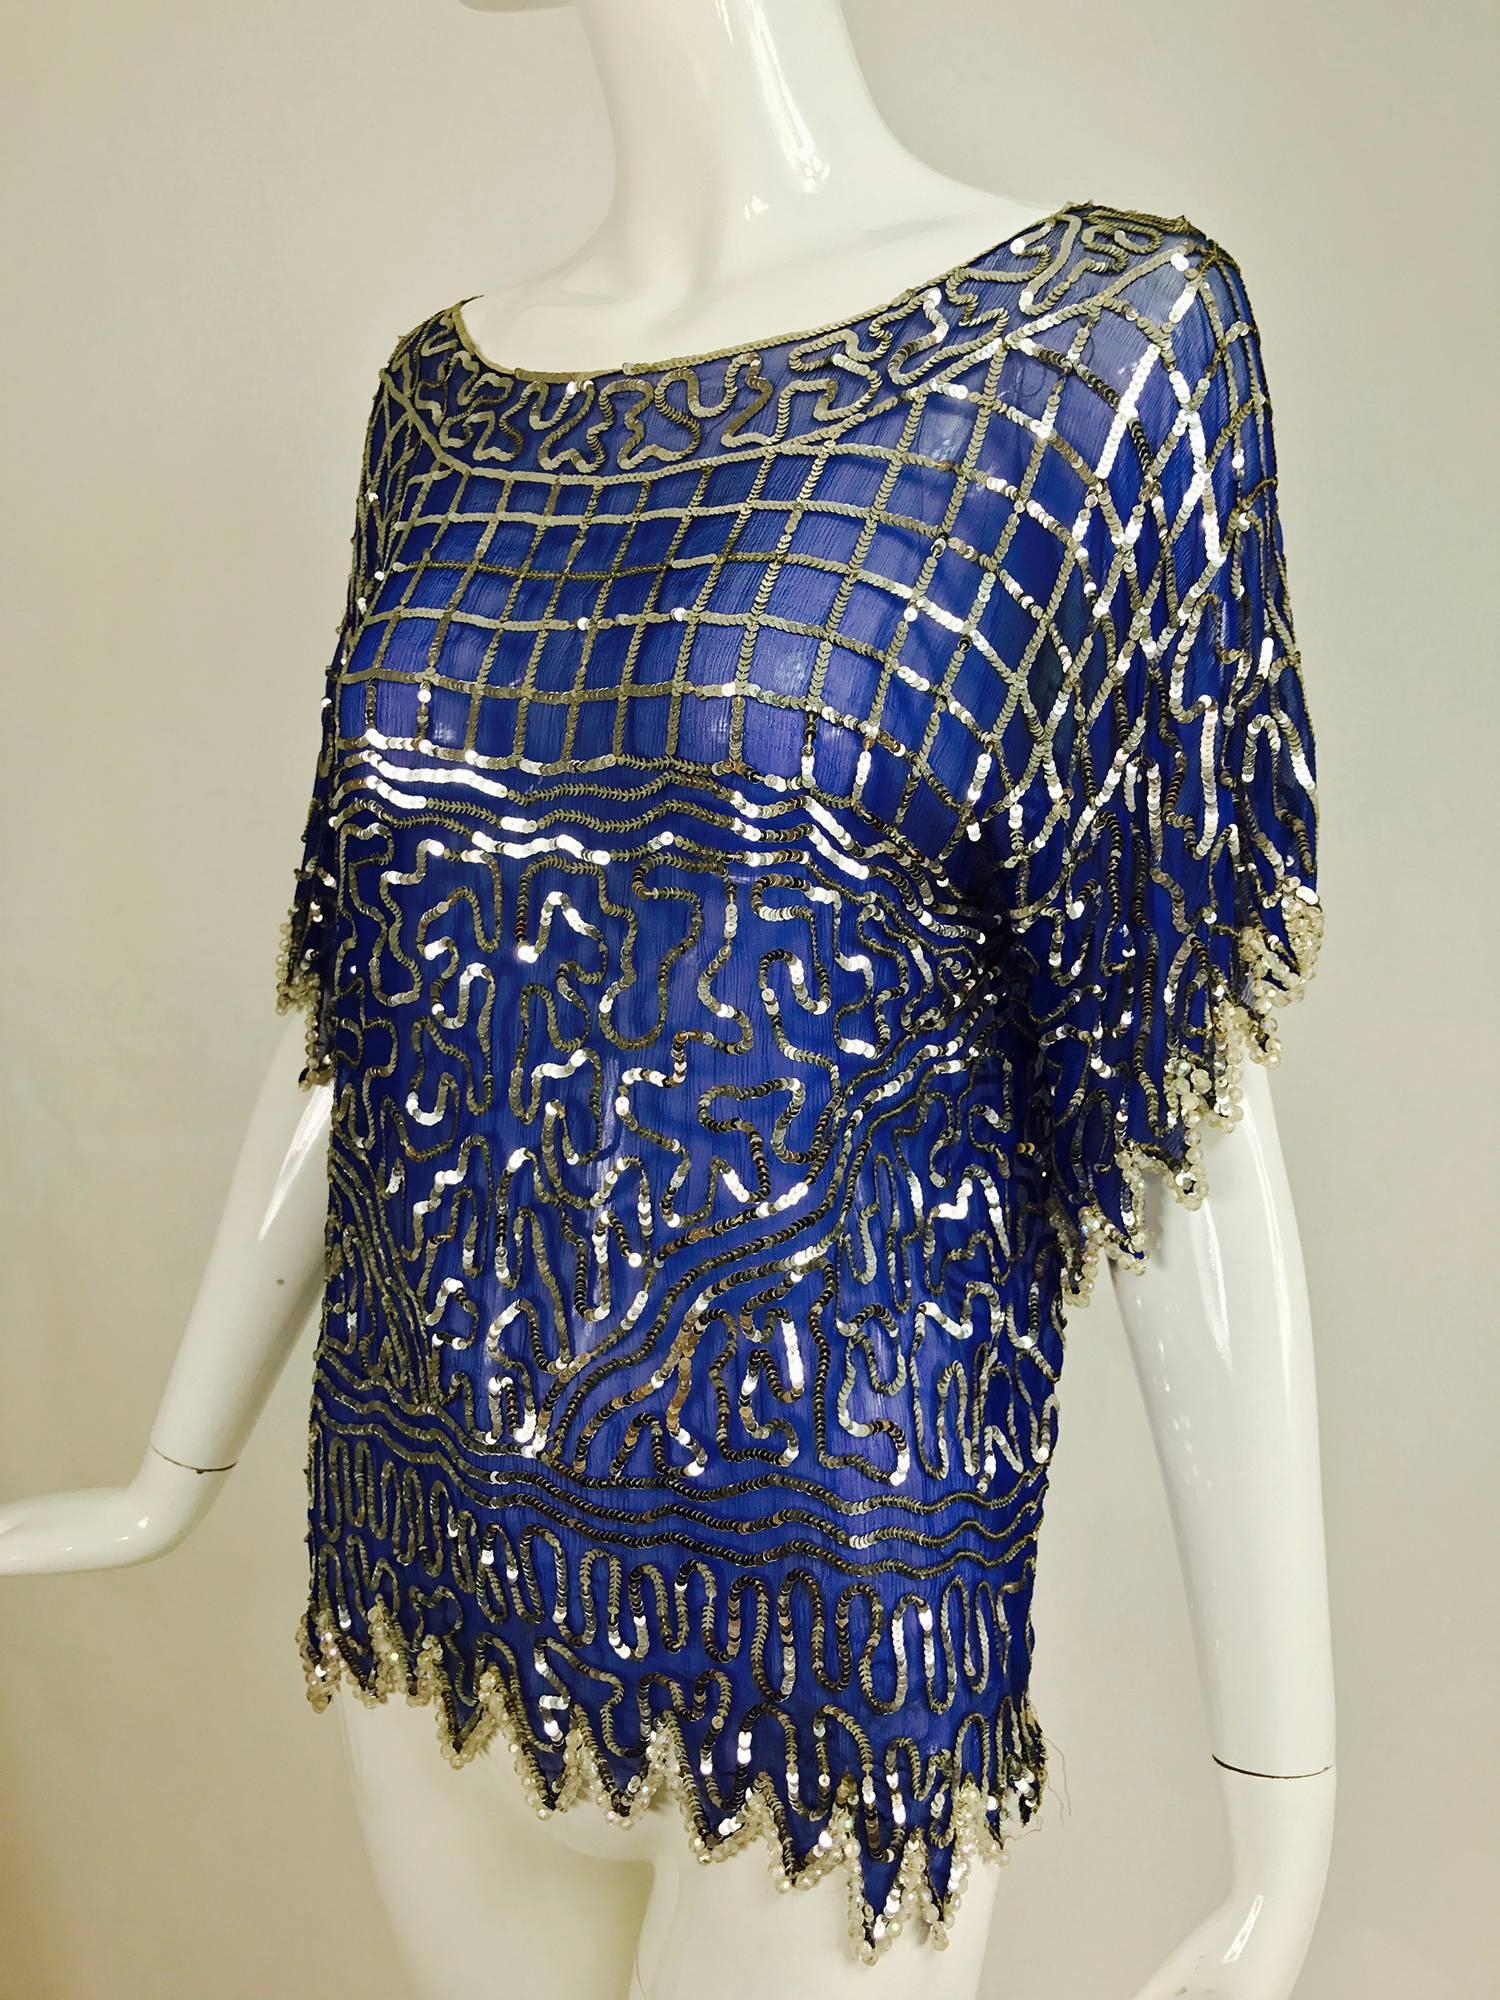 Swee lo blue silk silver sequin and beaded top from the 1970s...Royal blue silk chiffon is covered in silver sequins done in grids and swirls...Bateau neckline...Elbow length sleeves and hem form crystal bead trimmed saw tooth hems...Pull on top is